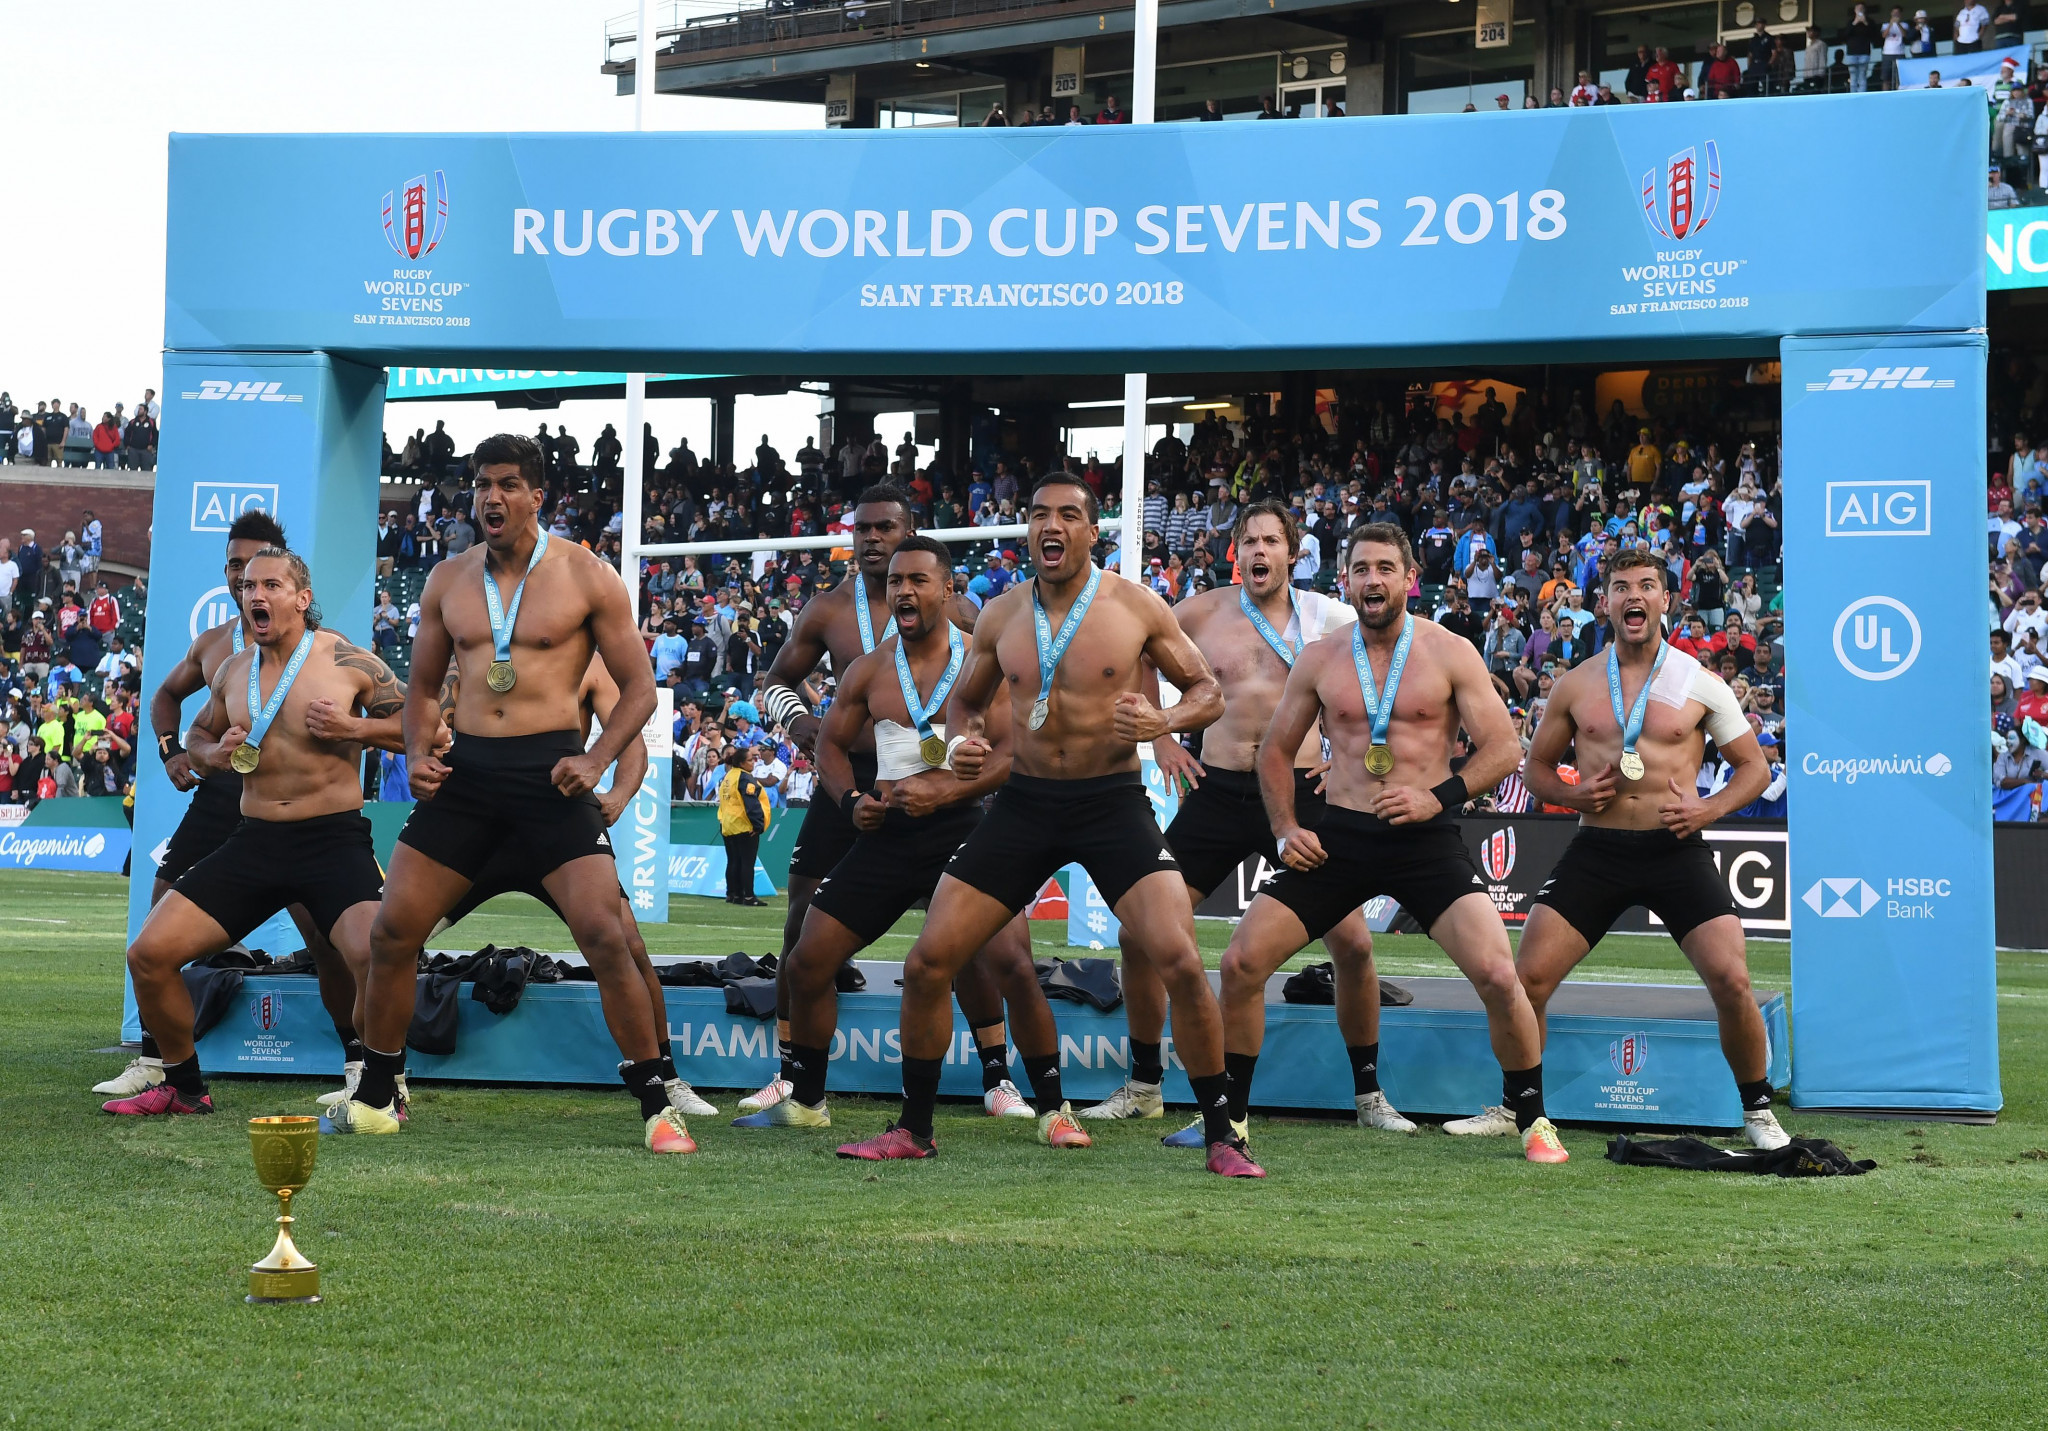 A record US television audience of nine million people watched the Rugby World Cup Sevens in San Francisco ©Getty Images